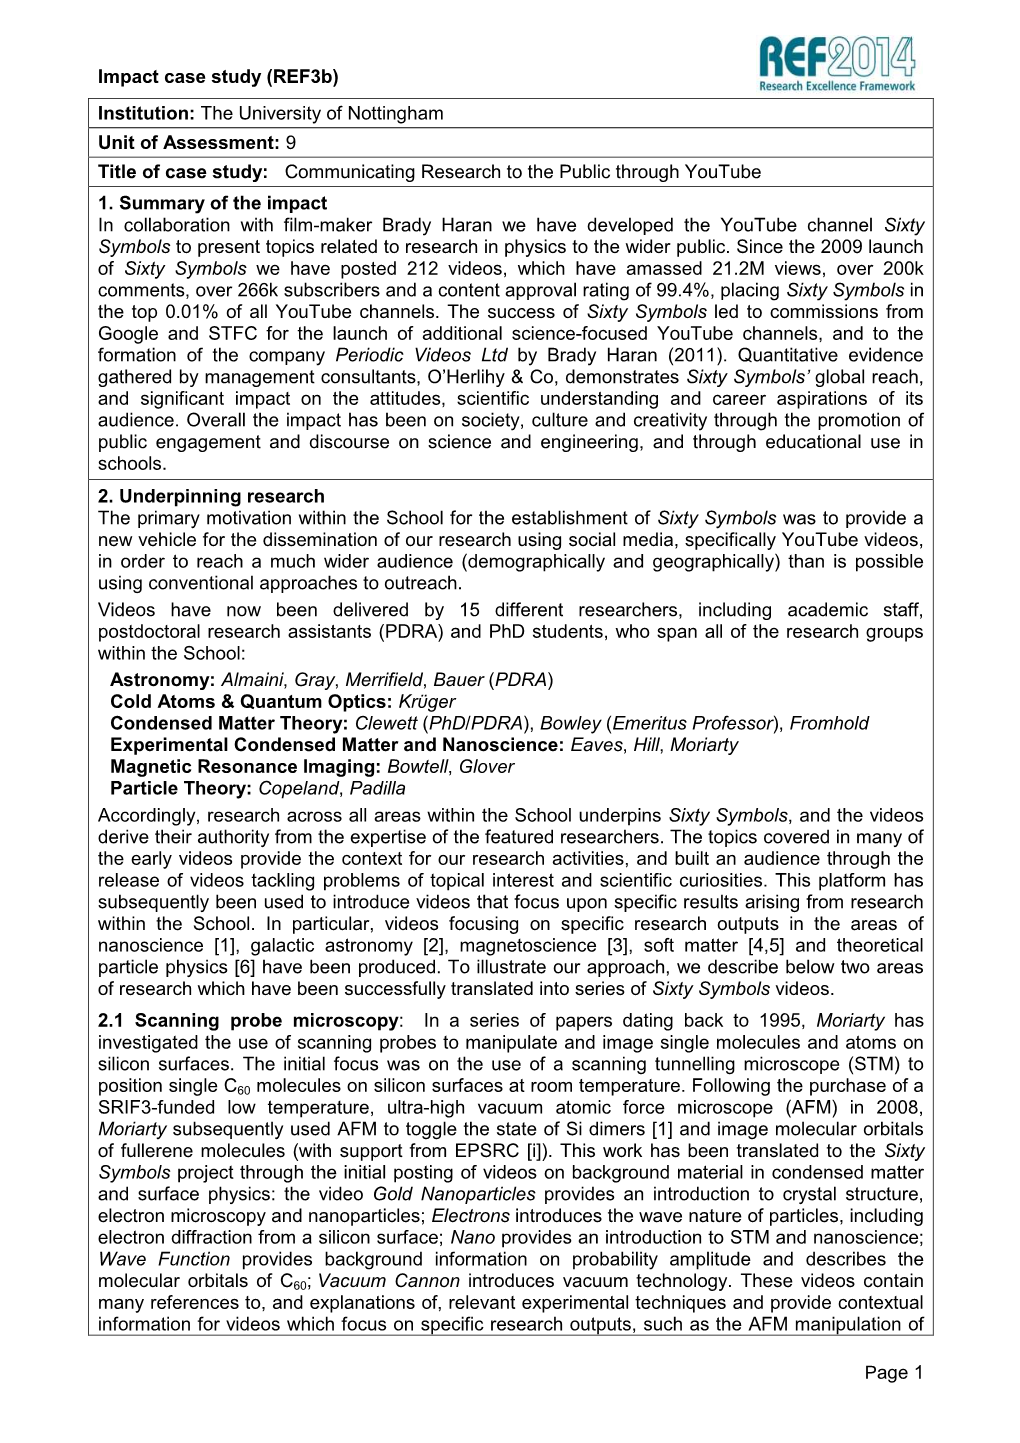 Impact Case Study (Ref3b) Institution: the University of Nottingham Unit of Assessment: 9 Title of Case Study: Communicating Research to the Public Through Youtube 1